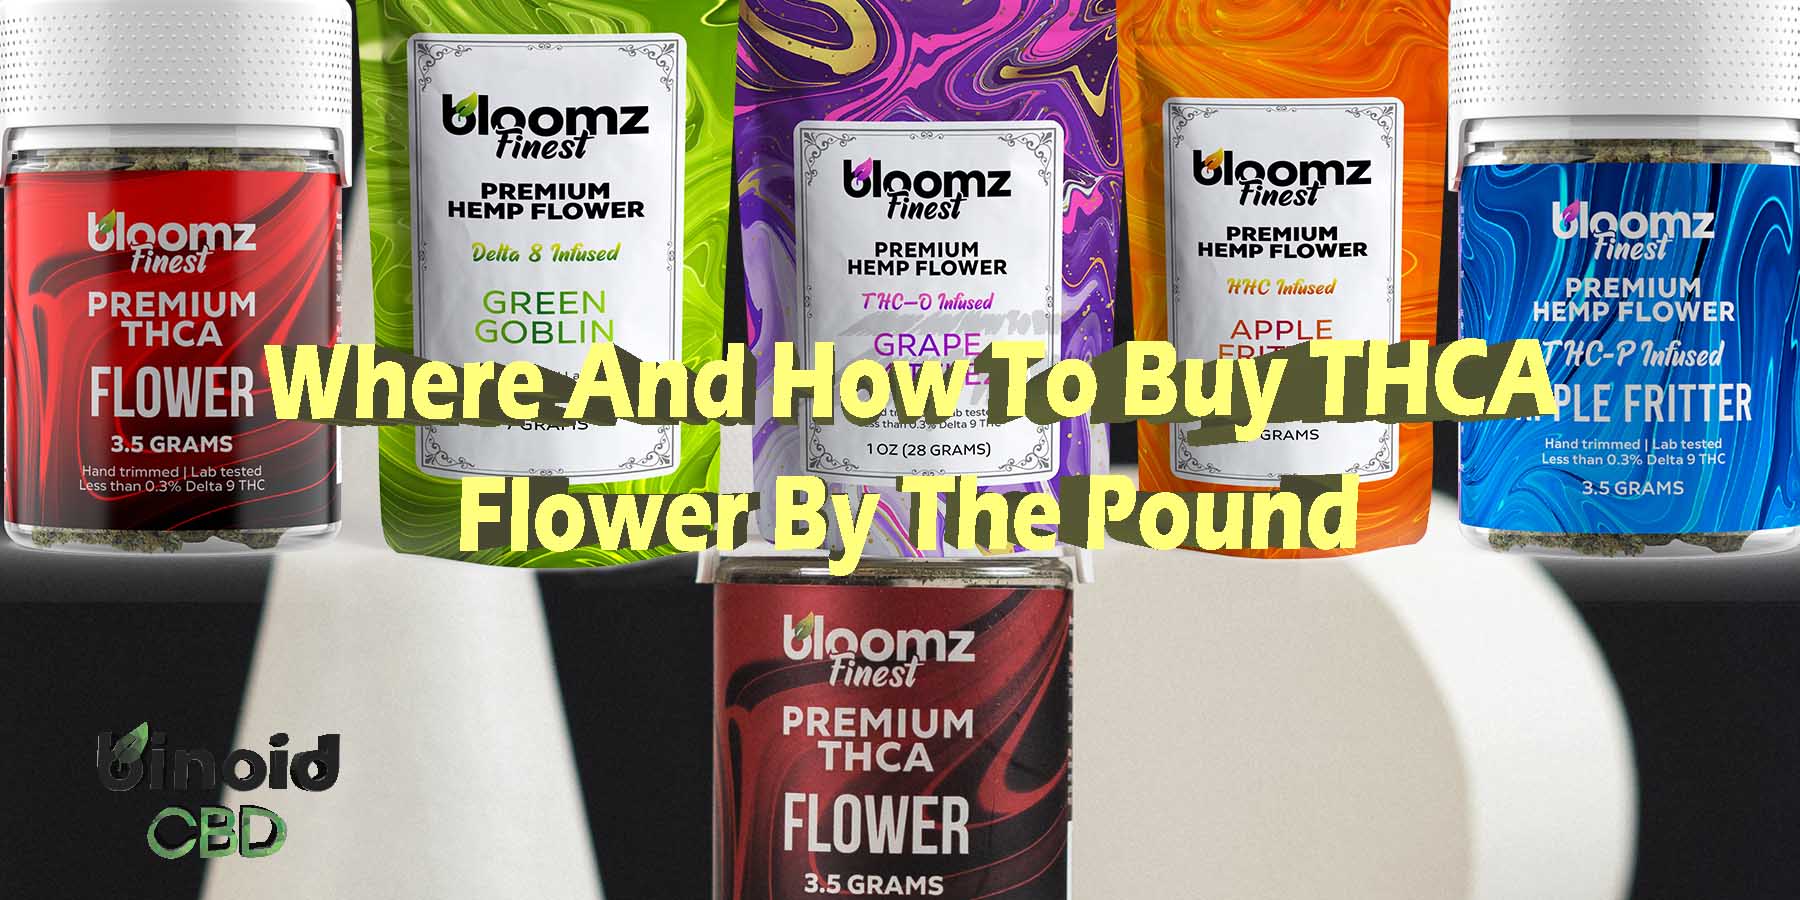 Where And How To Buy THCA Flower By The Pound Made Pre Rolls Where To Get Near Me Best Place Lowest Price Coupon Discount Strongest Brand Bloomz